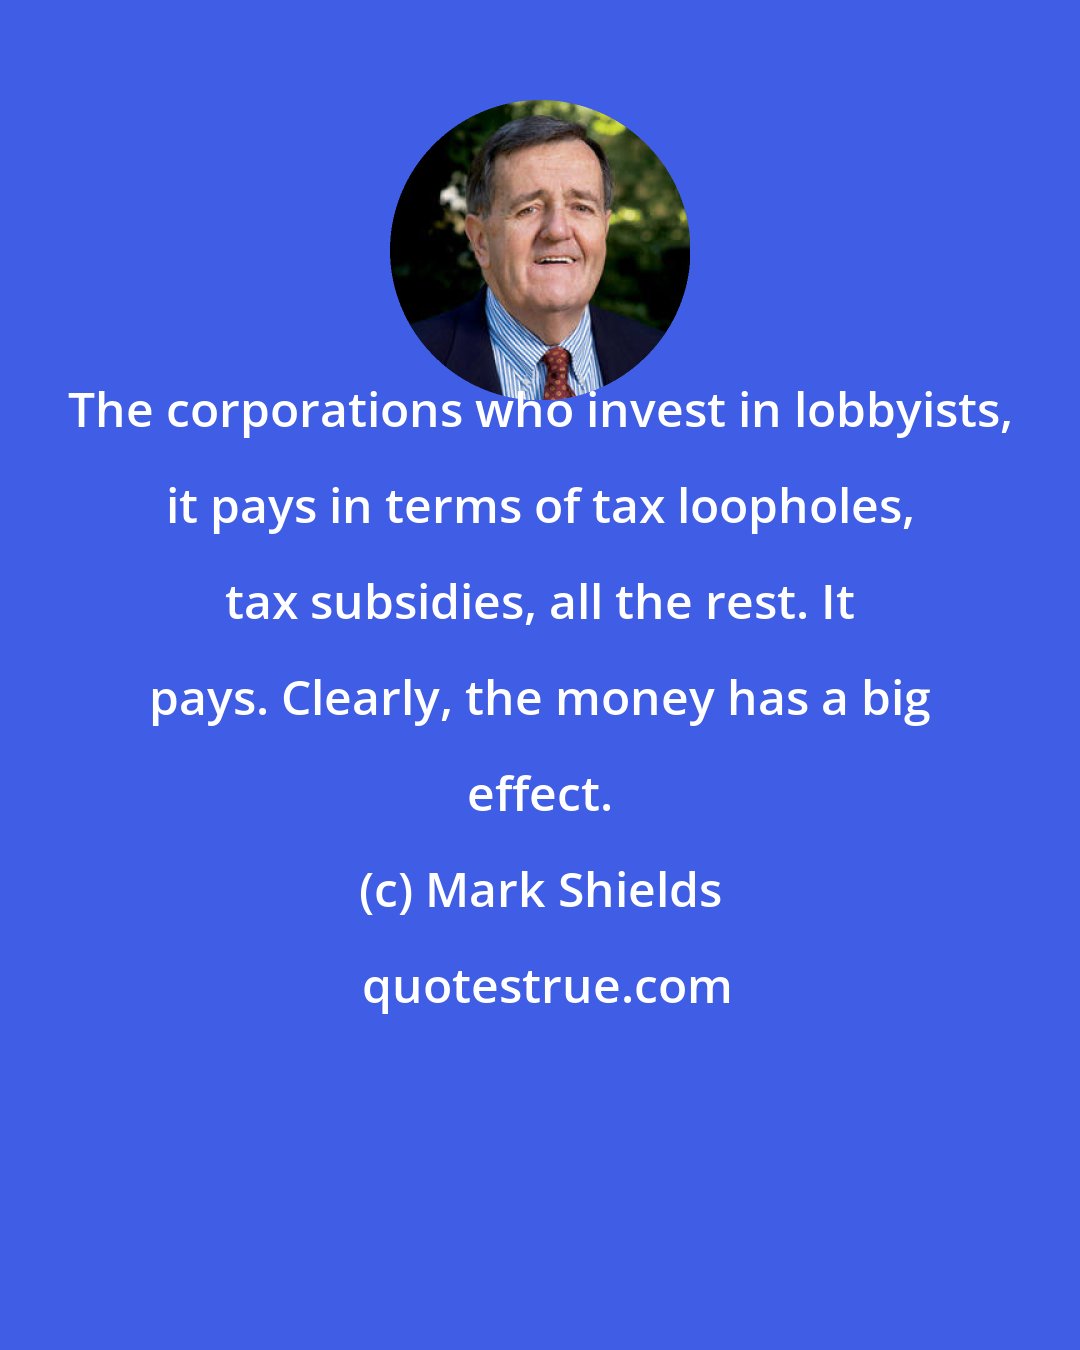 Mark Shields: The corporations who invest in lobbyists, it pays in terms of tax loopholes, tax subsidies, all the rest. It pays. Clearly, the money has a big effect.